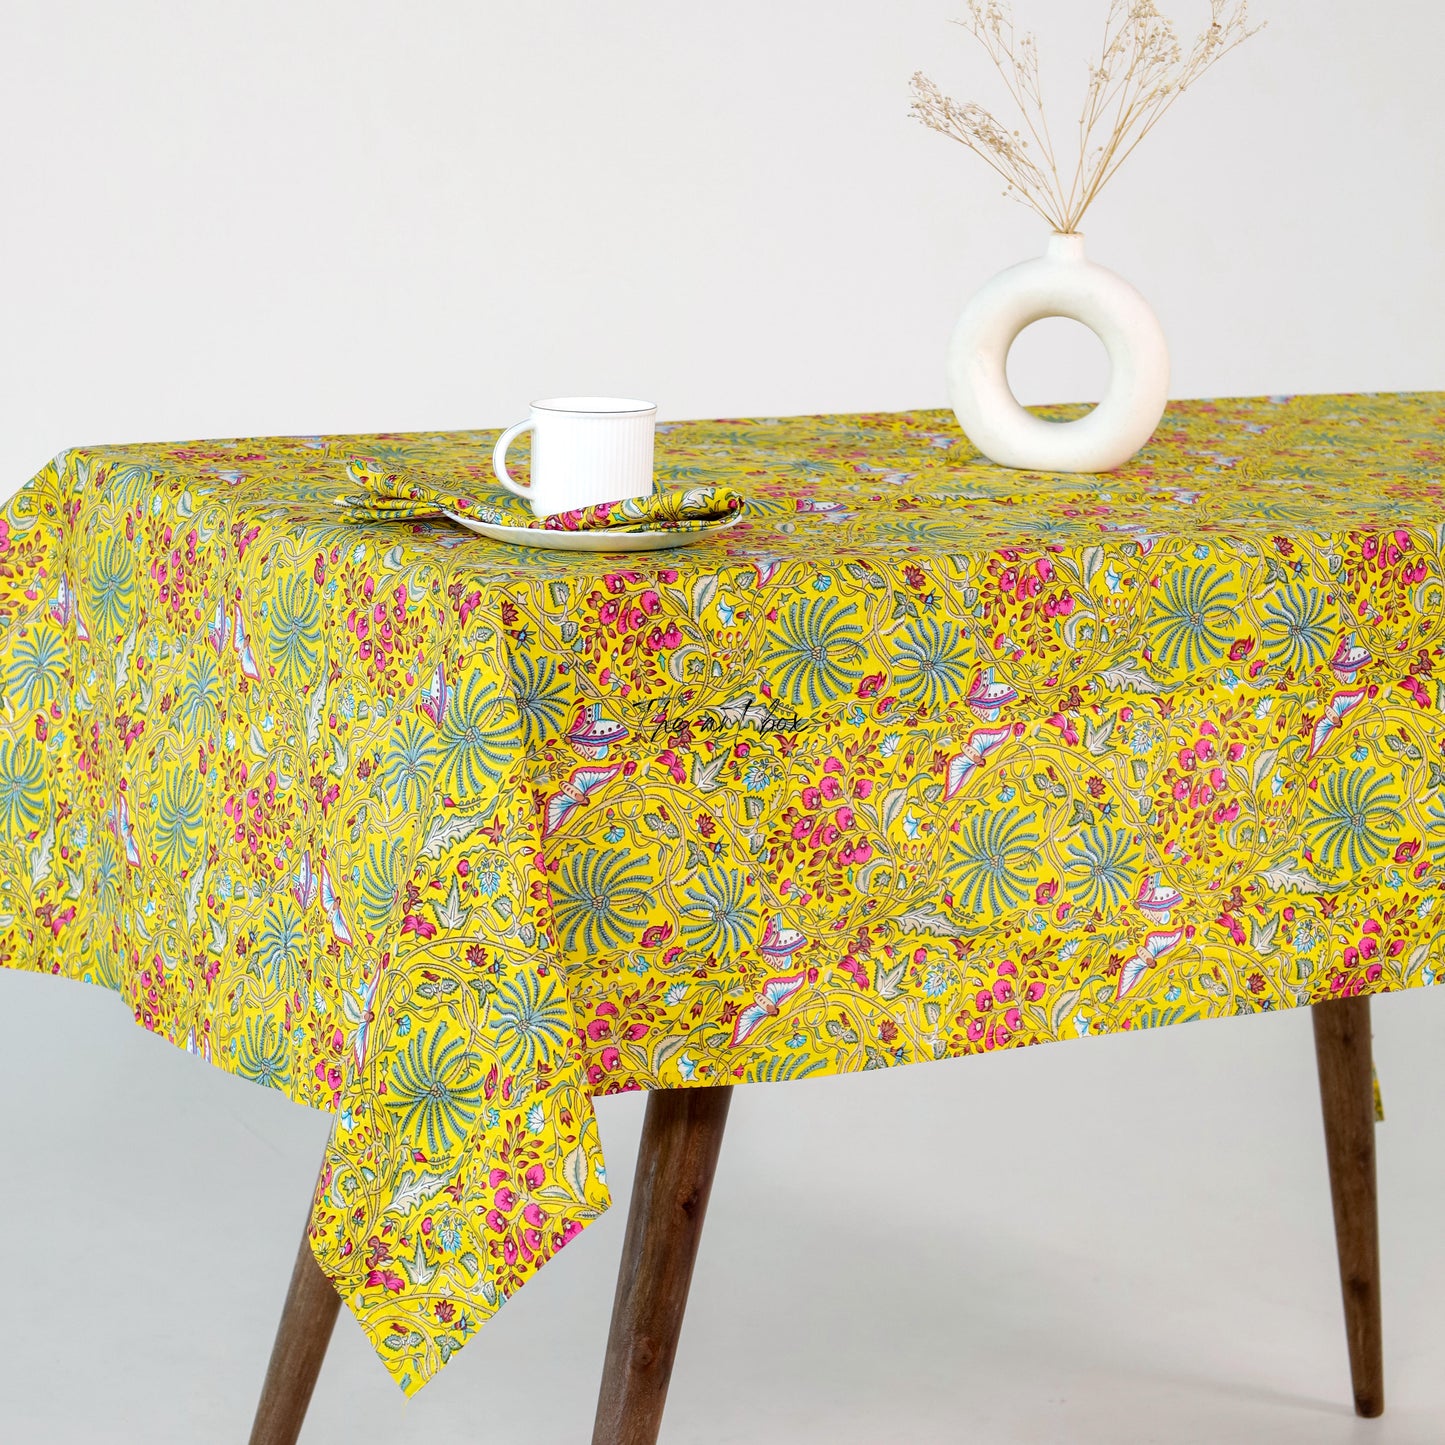 Garden Harmony Yellow Floral Printed Cotton Table Covers – Bring the Outdoors In for a Stunning Dining Experience